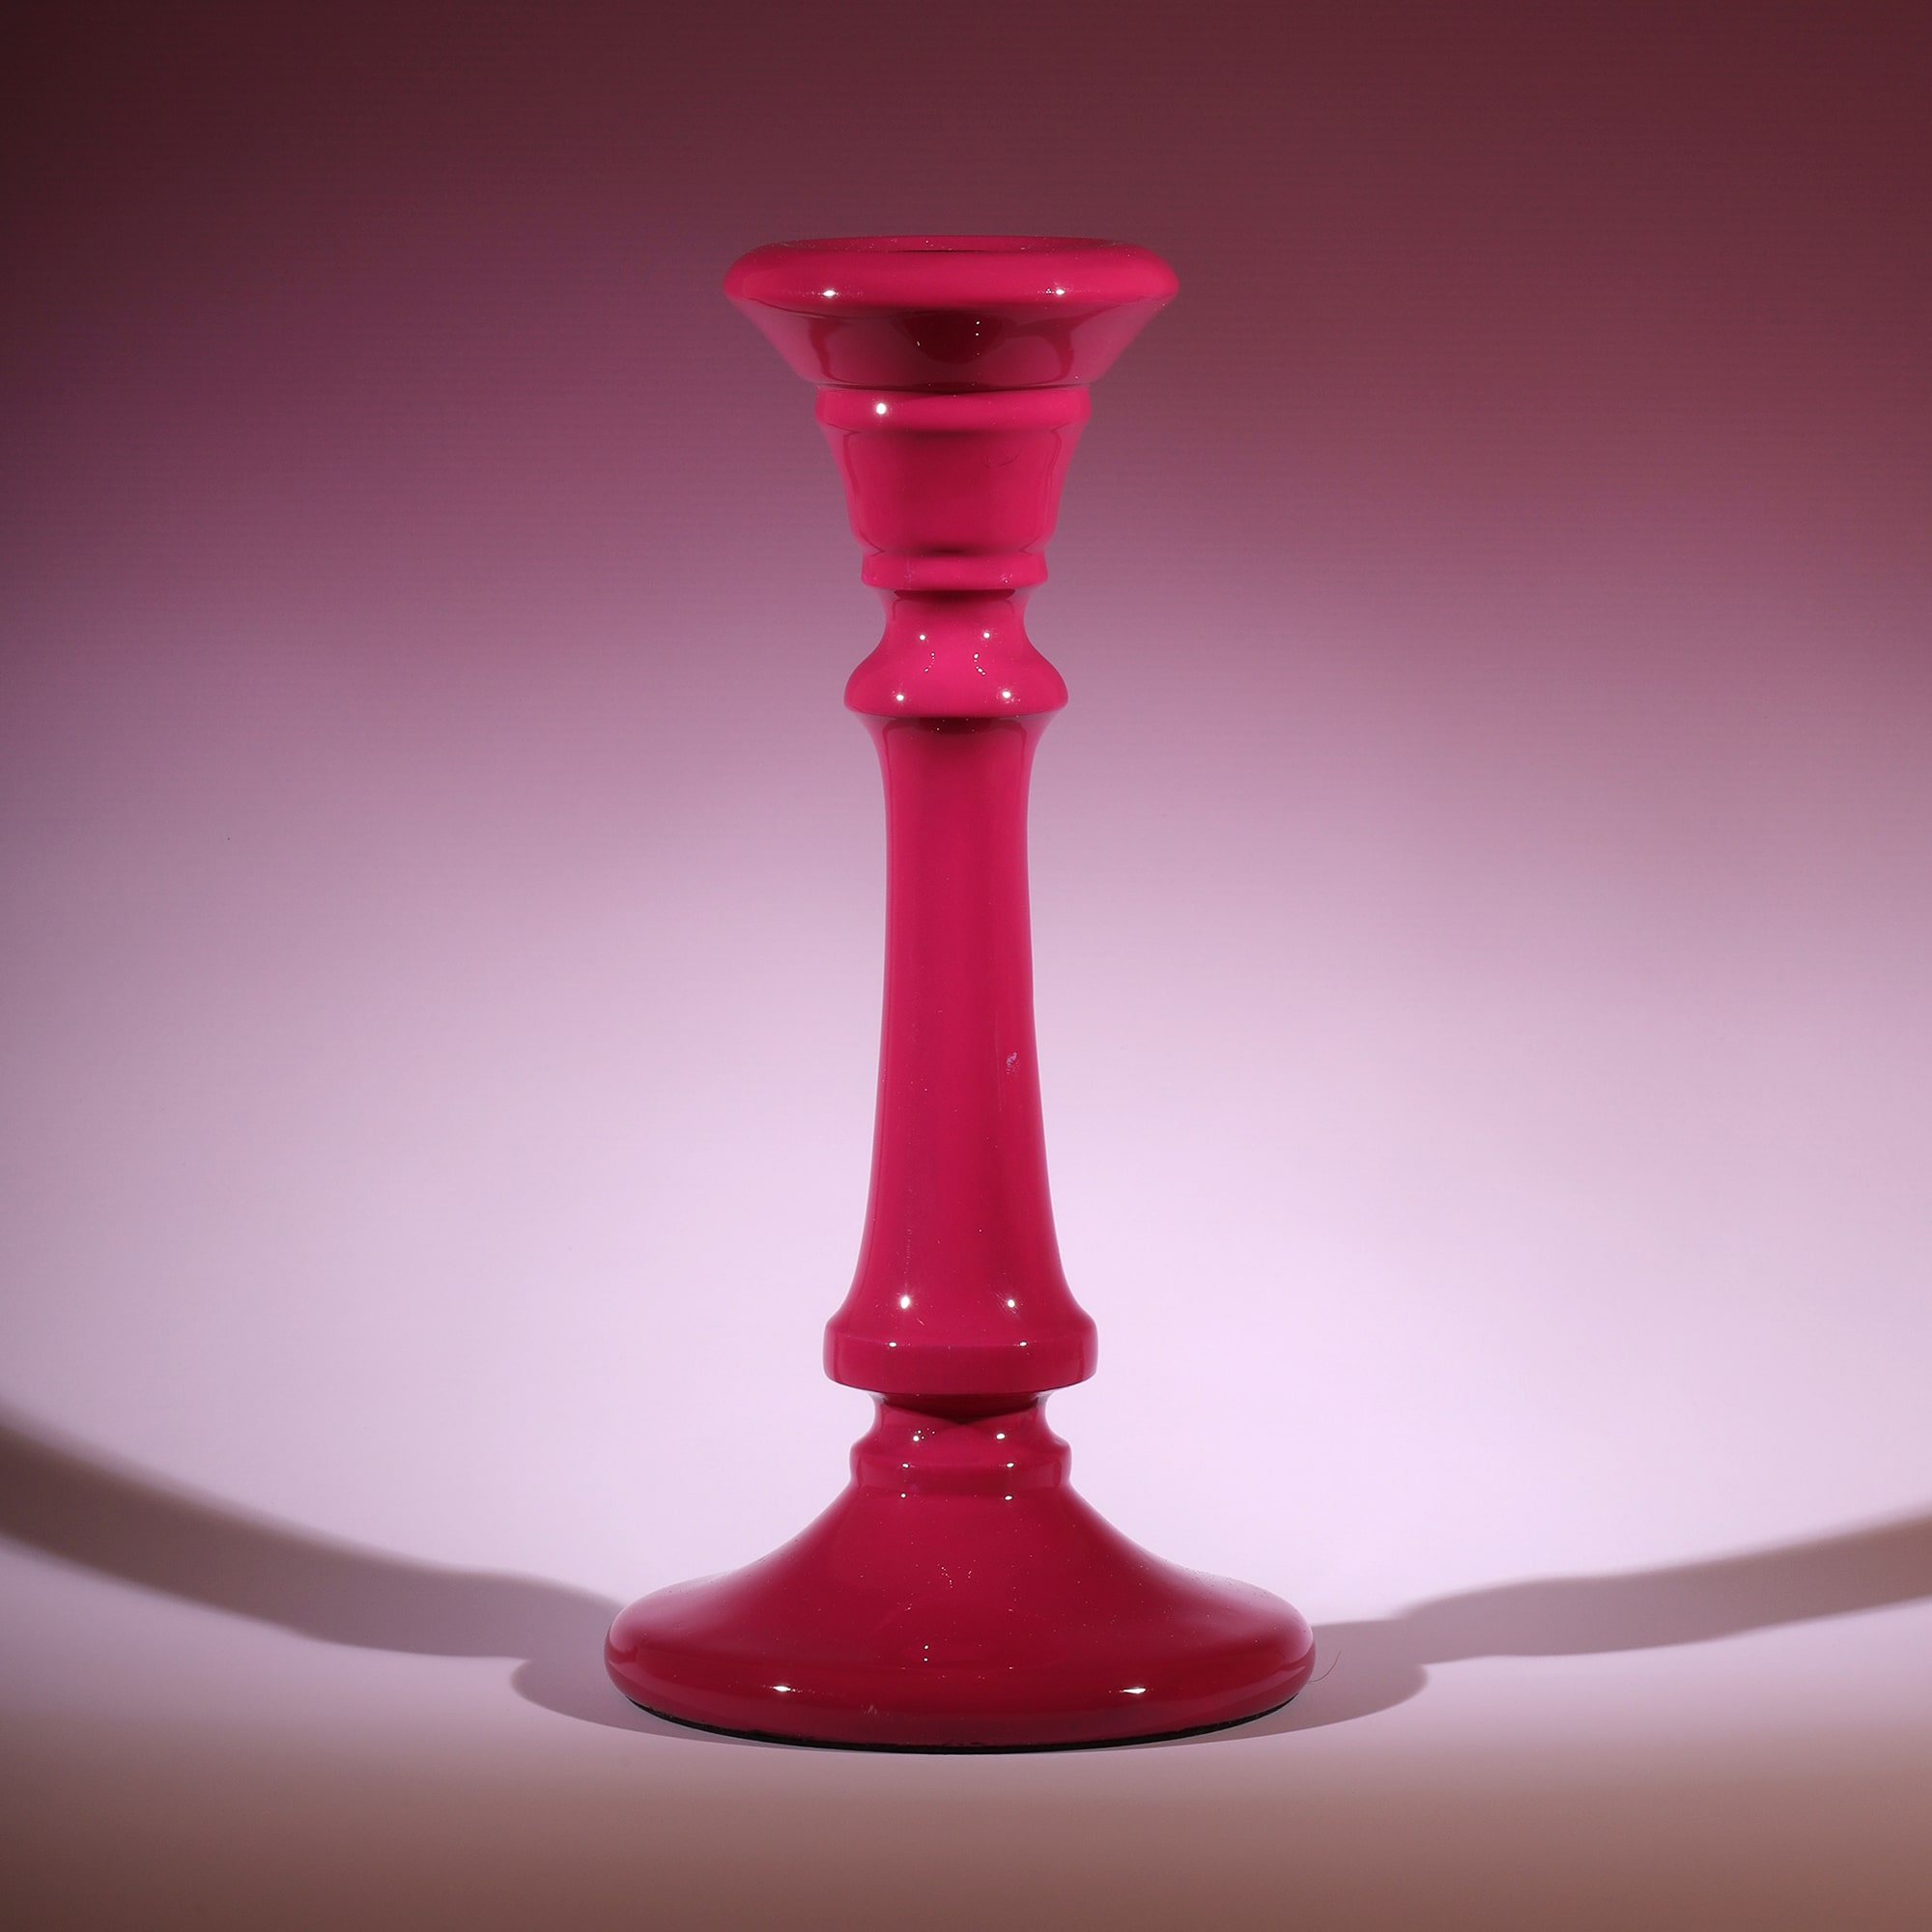 Fuschia Polished Lacquer Candle holder,tapered at the top,moving down it has various section and a long smooth piece to finish with a tapered base